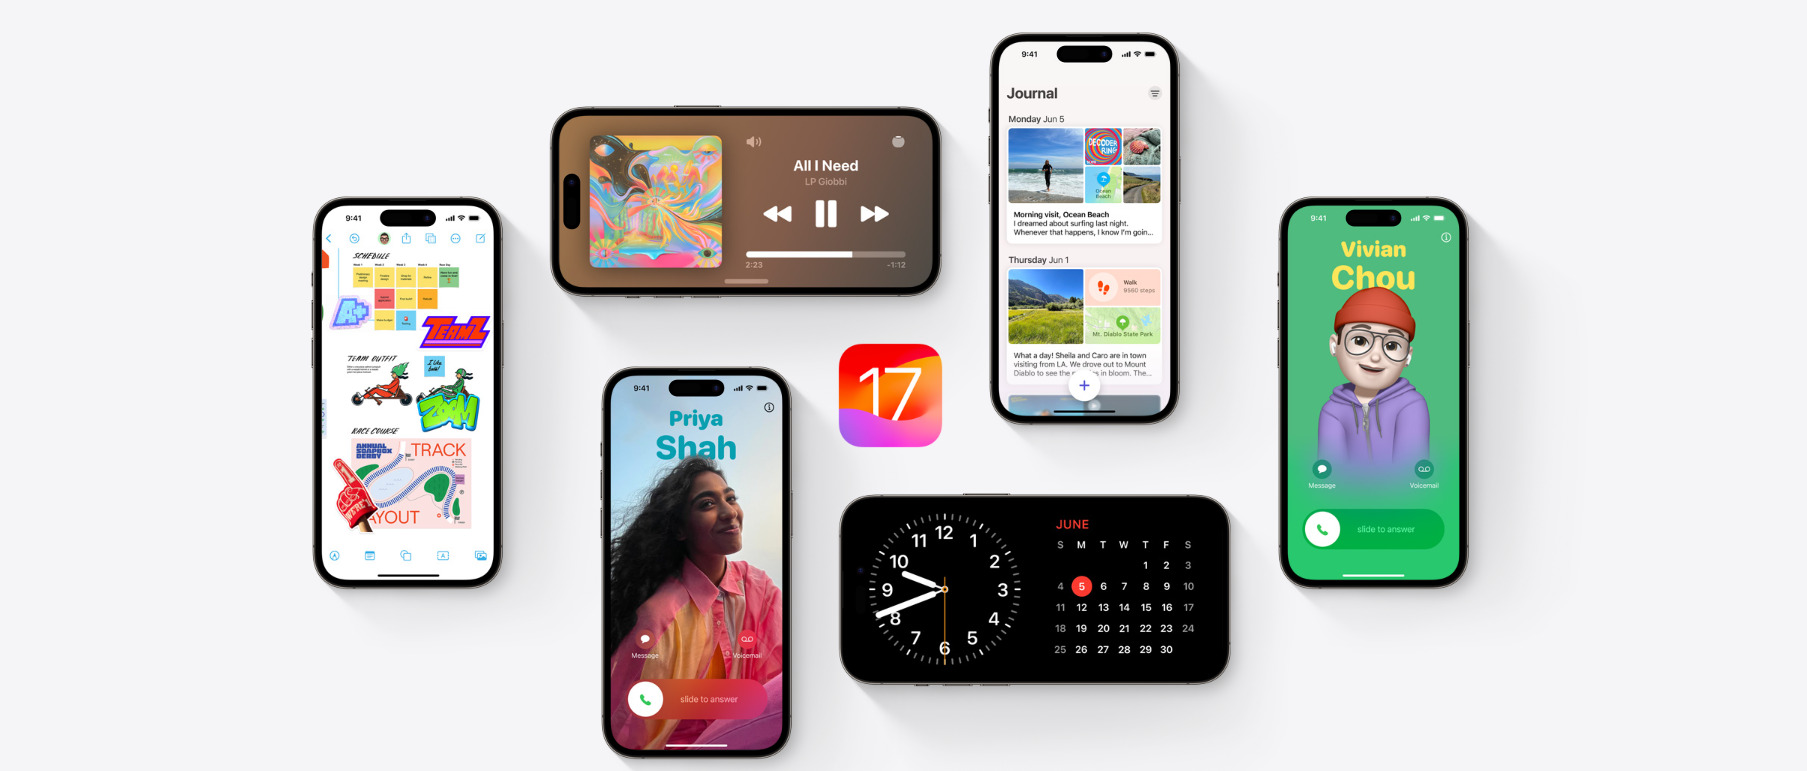 The beta is already available with new features for AirDrop, Apple Music, and Dynamics Island